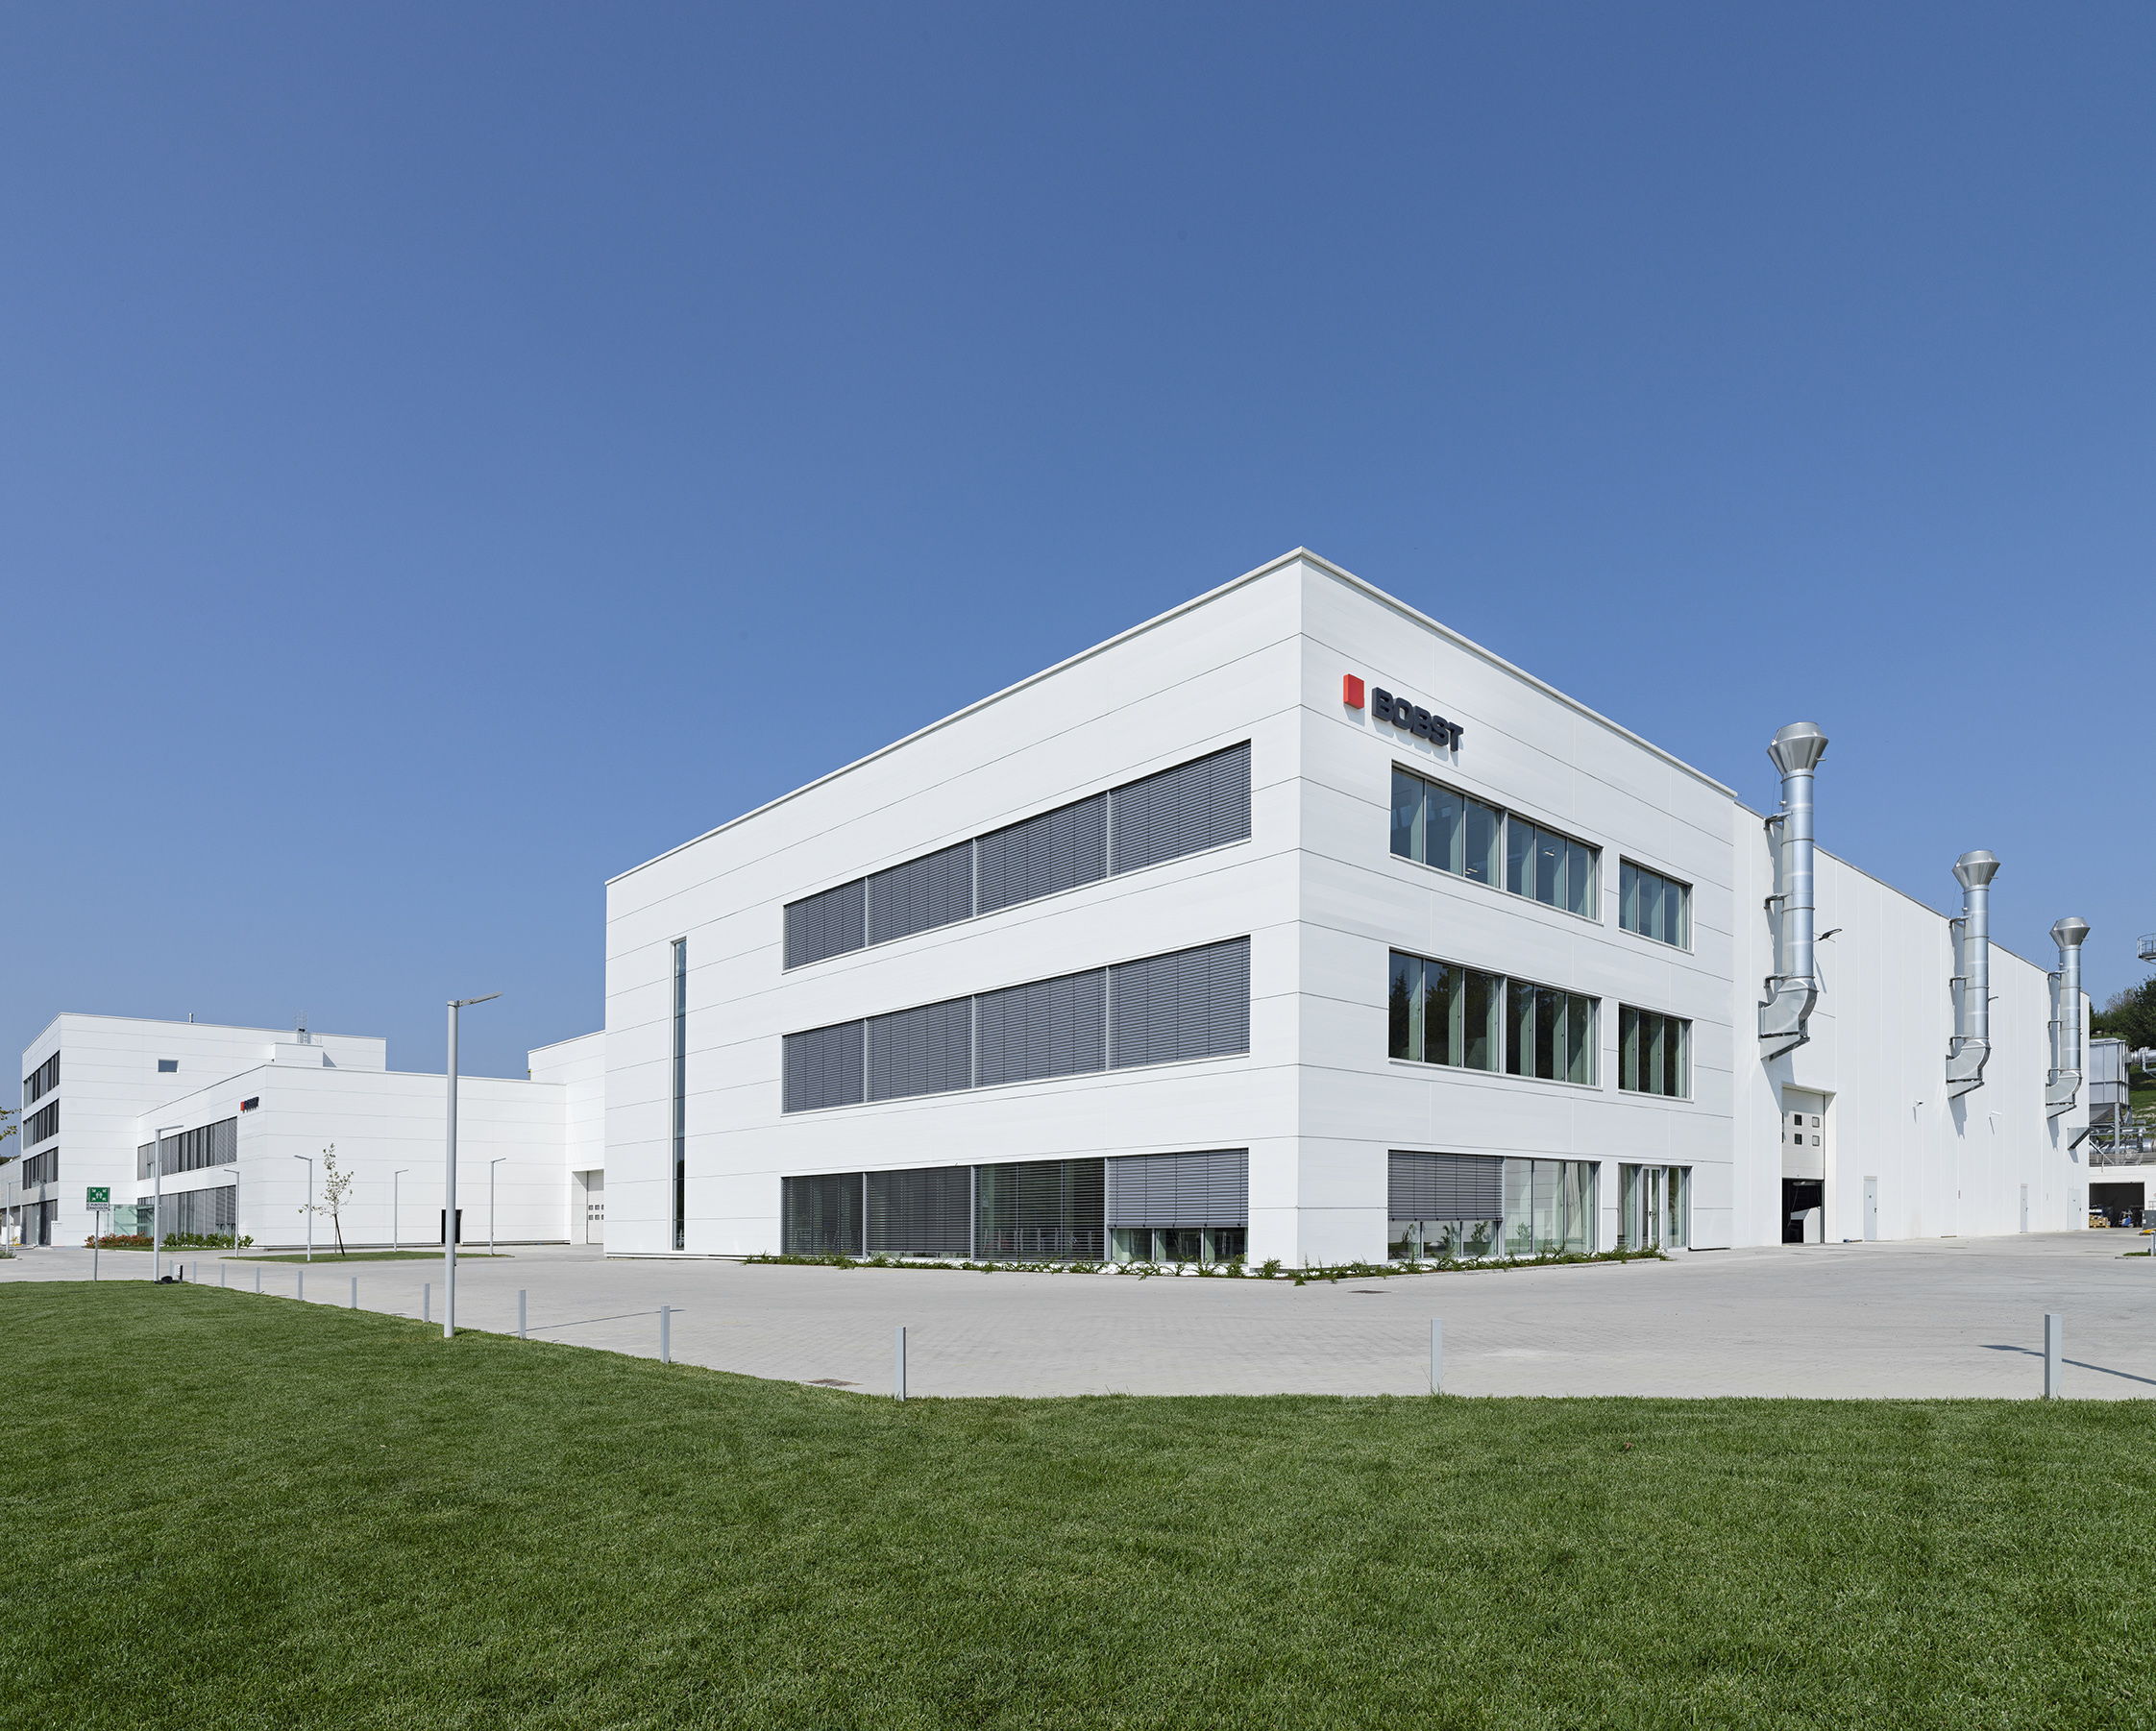 The Competence Center facility for flexible packaging technologies adjoining the production plant of Bobst Italia, in San Giorgio Monferrato, Italy